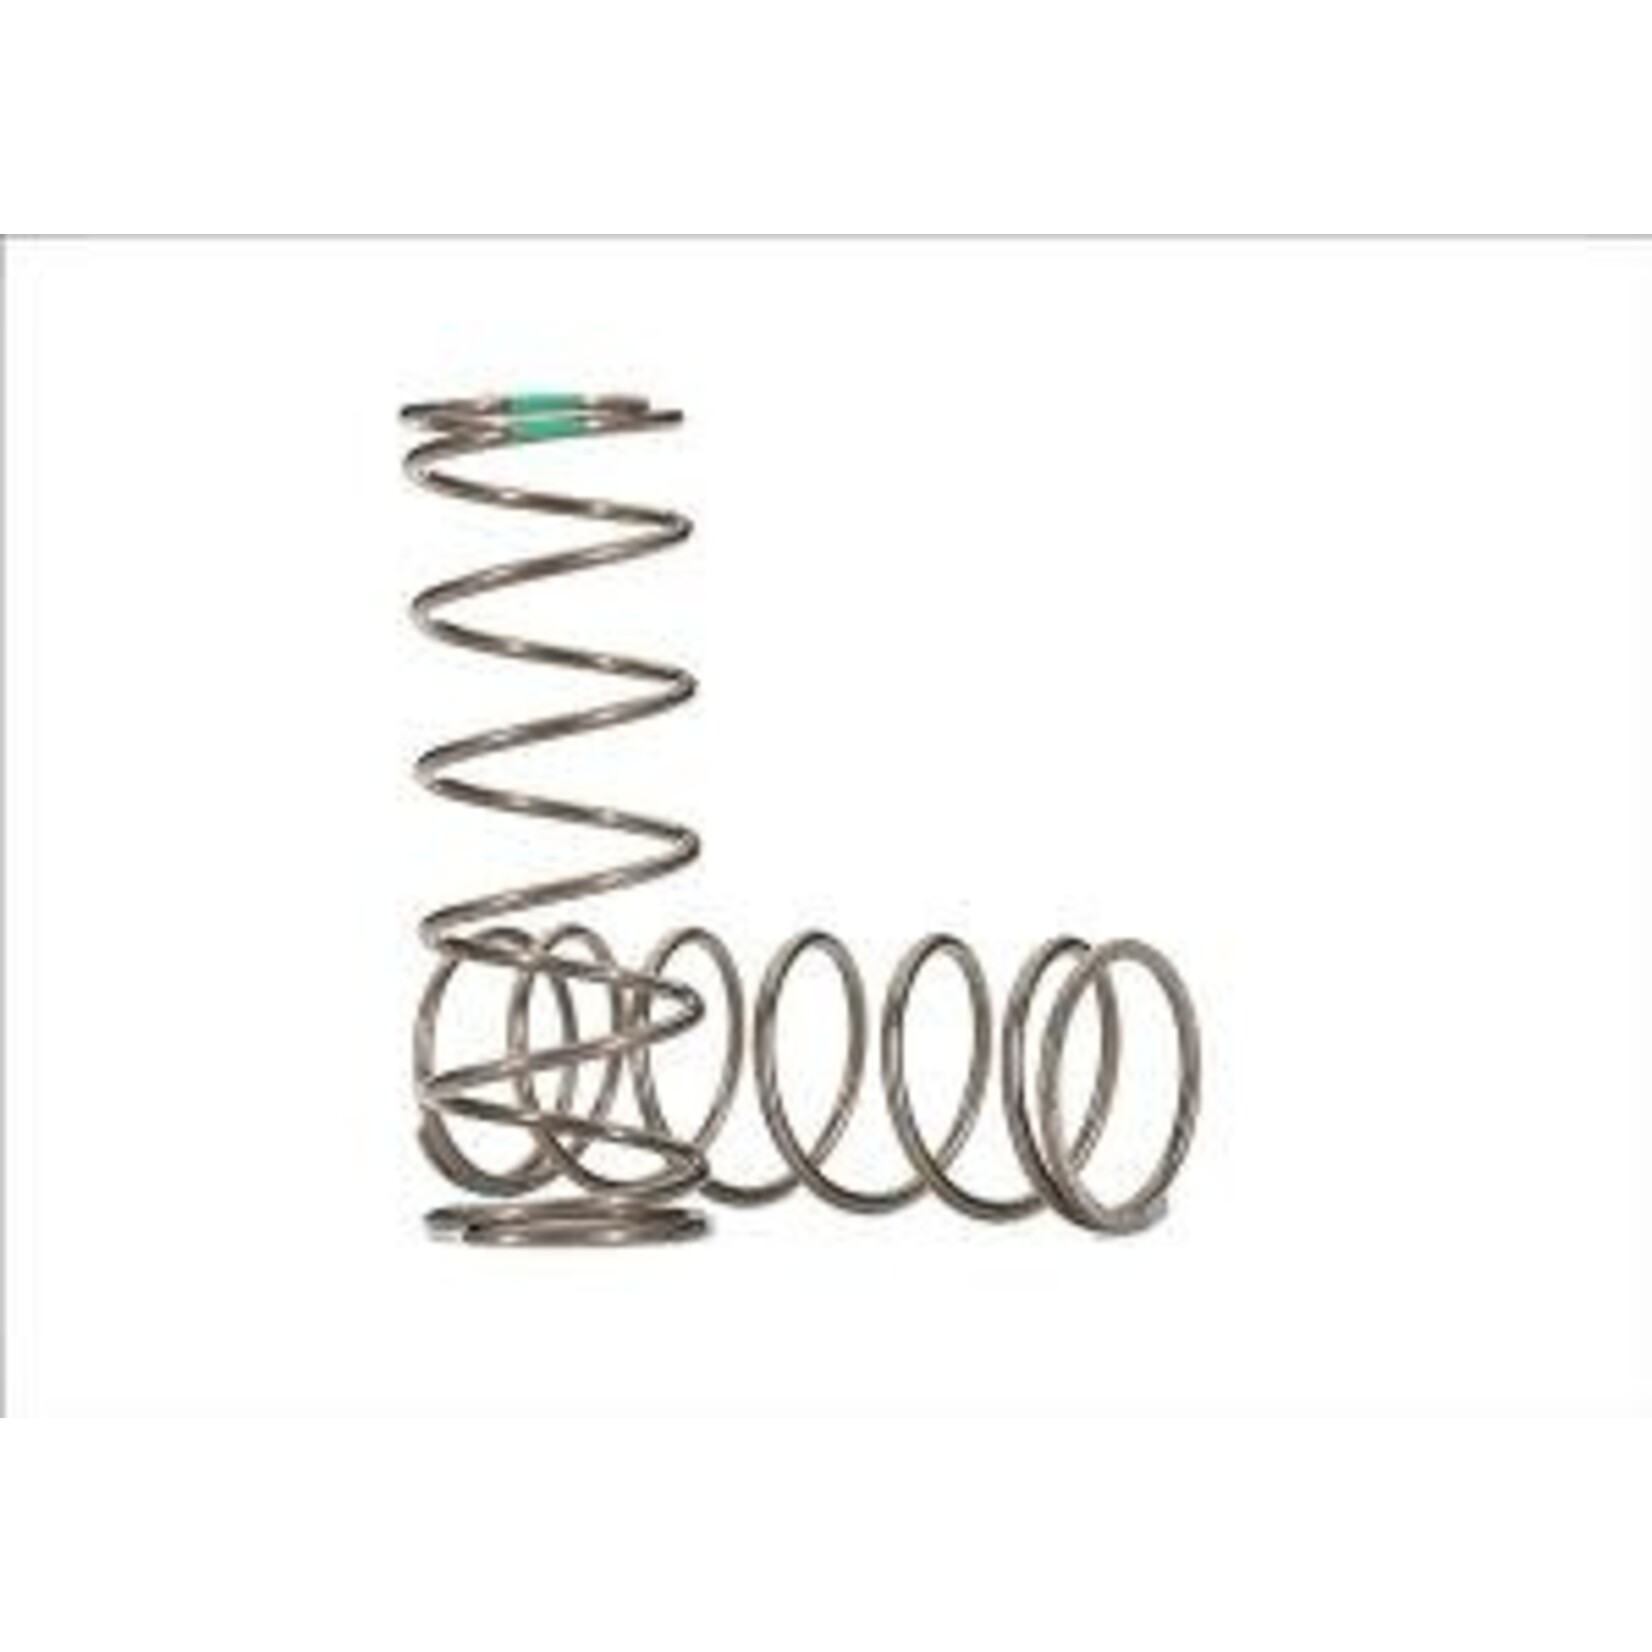 Traxxas 8959 Springs, shock (natural finish) (GT-Maxx®) (2.054 rate) (2)